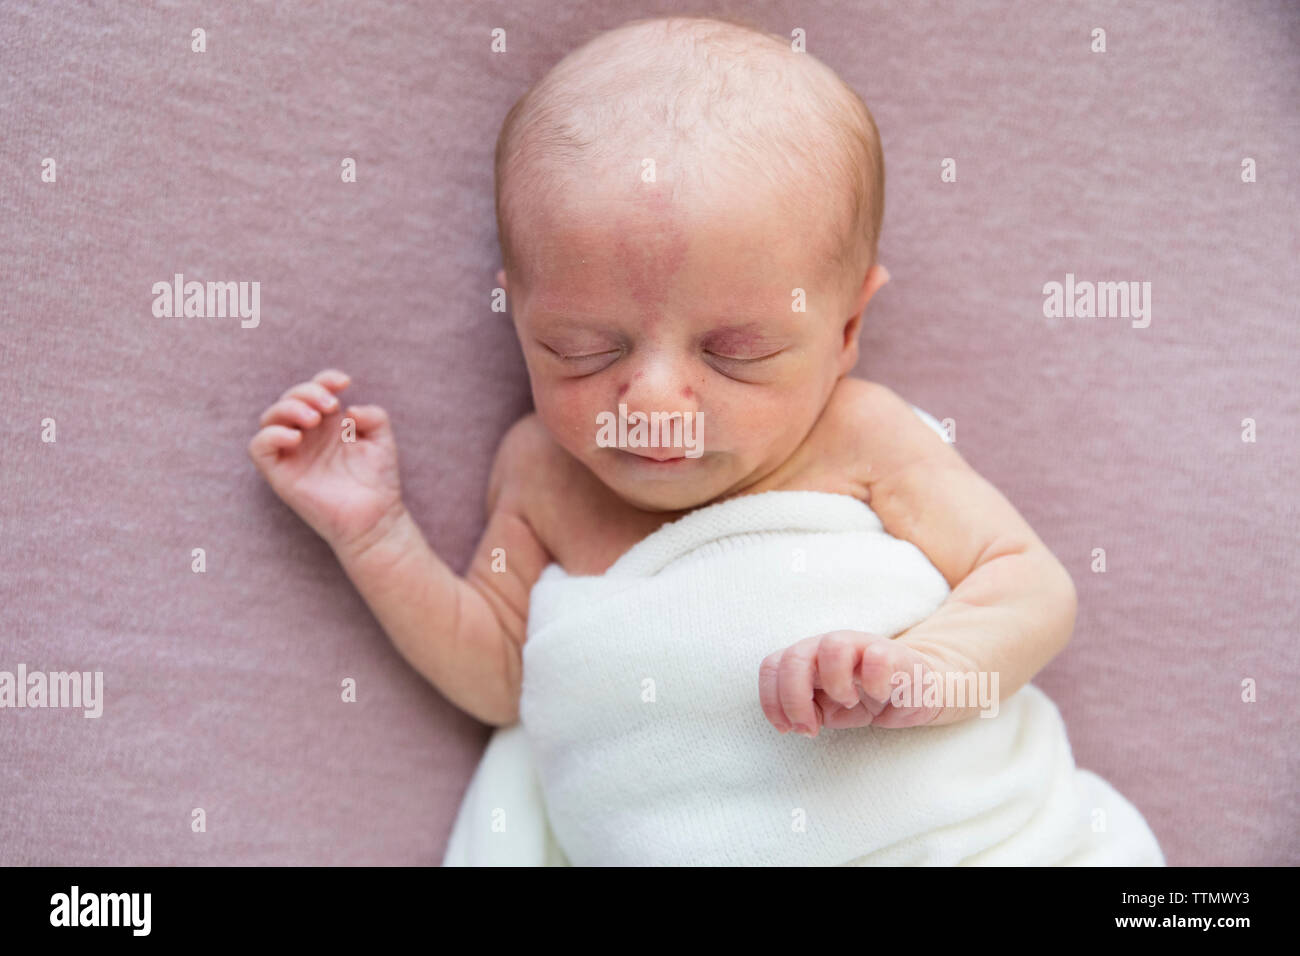 Close up Newborn Baby Girl in White Wrap Laying on Pink Blanket Stock Photo